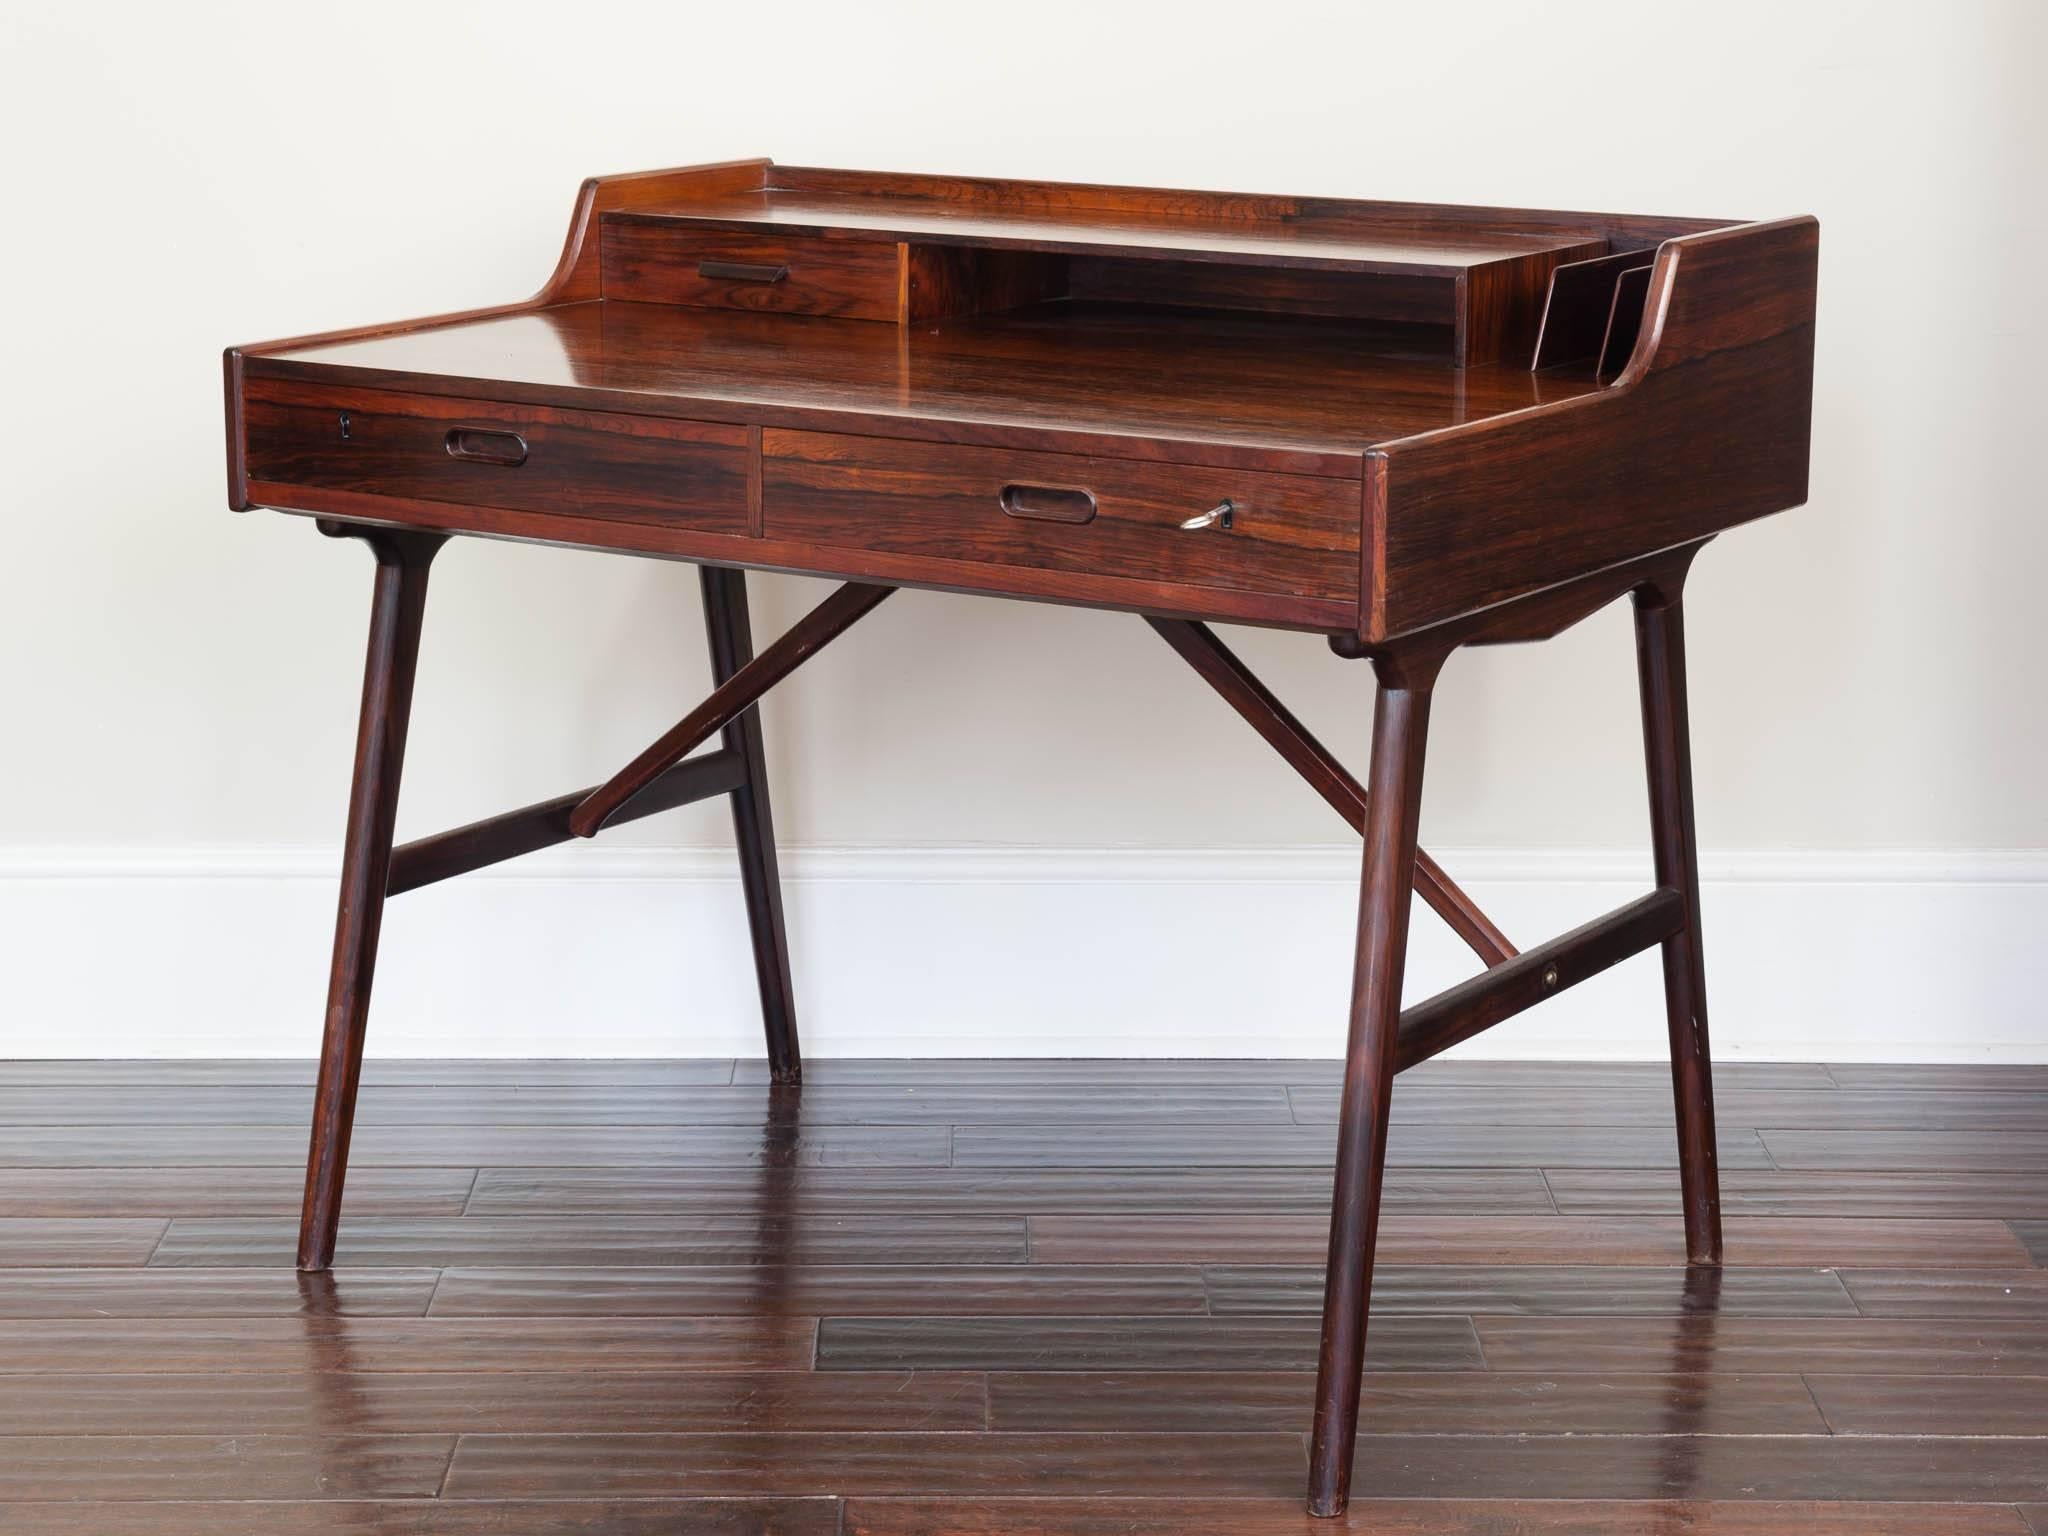 Stunning 1960s rosewood desk by Arne Wahl Iversen for Vinde Mobelfabrik. A beautiful and functional piece with splayed legs with connecting cross supports and further feature supports to the underneath of the desk. The desk tabletop writing surface